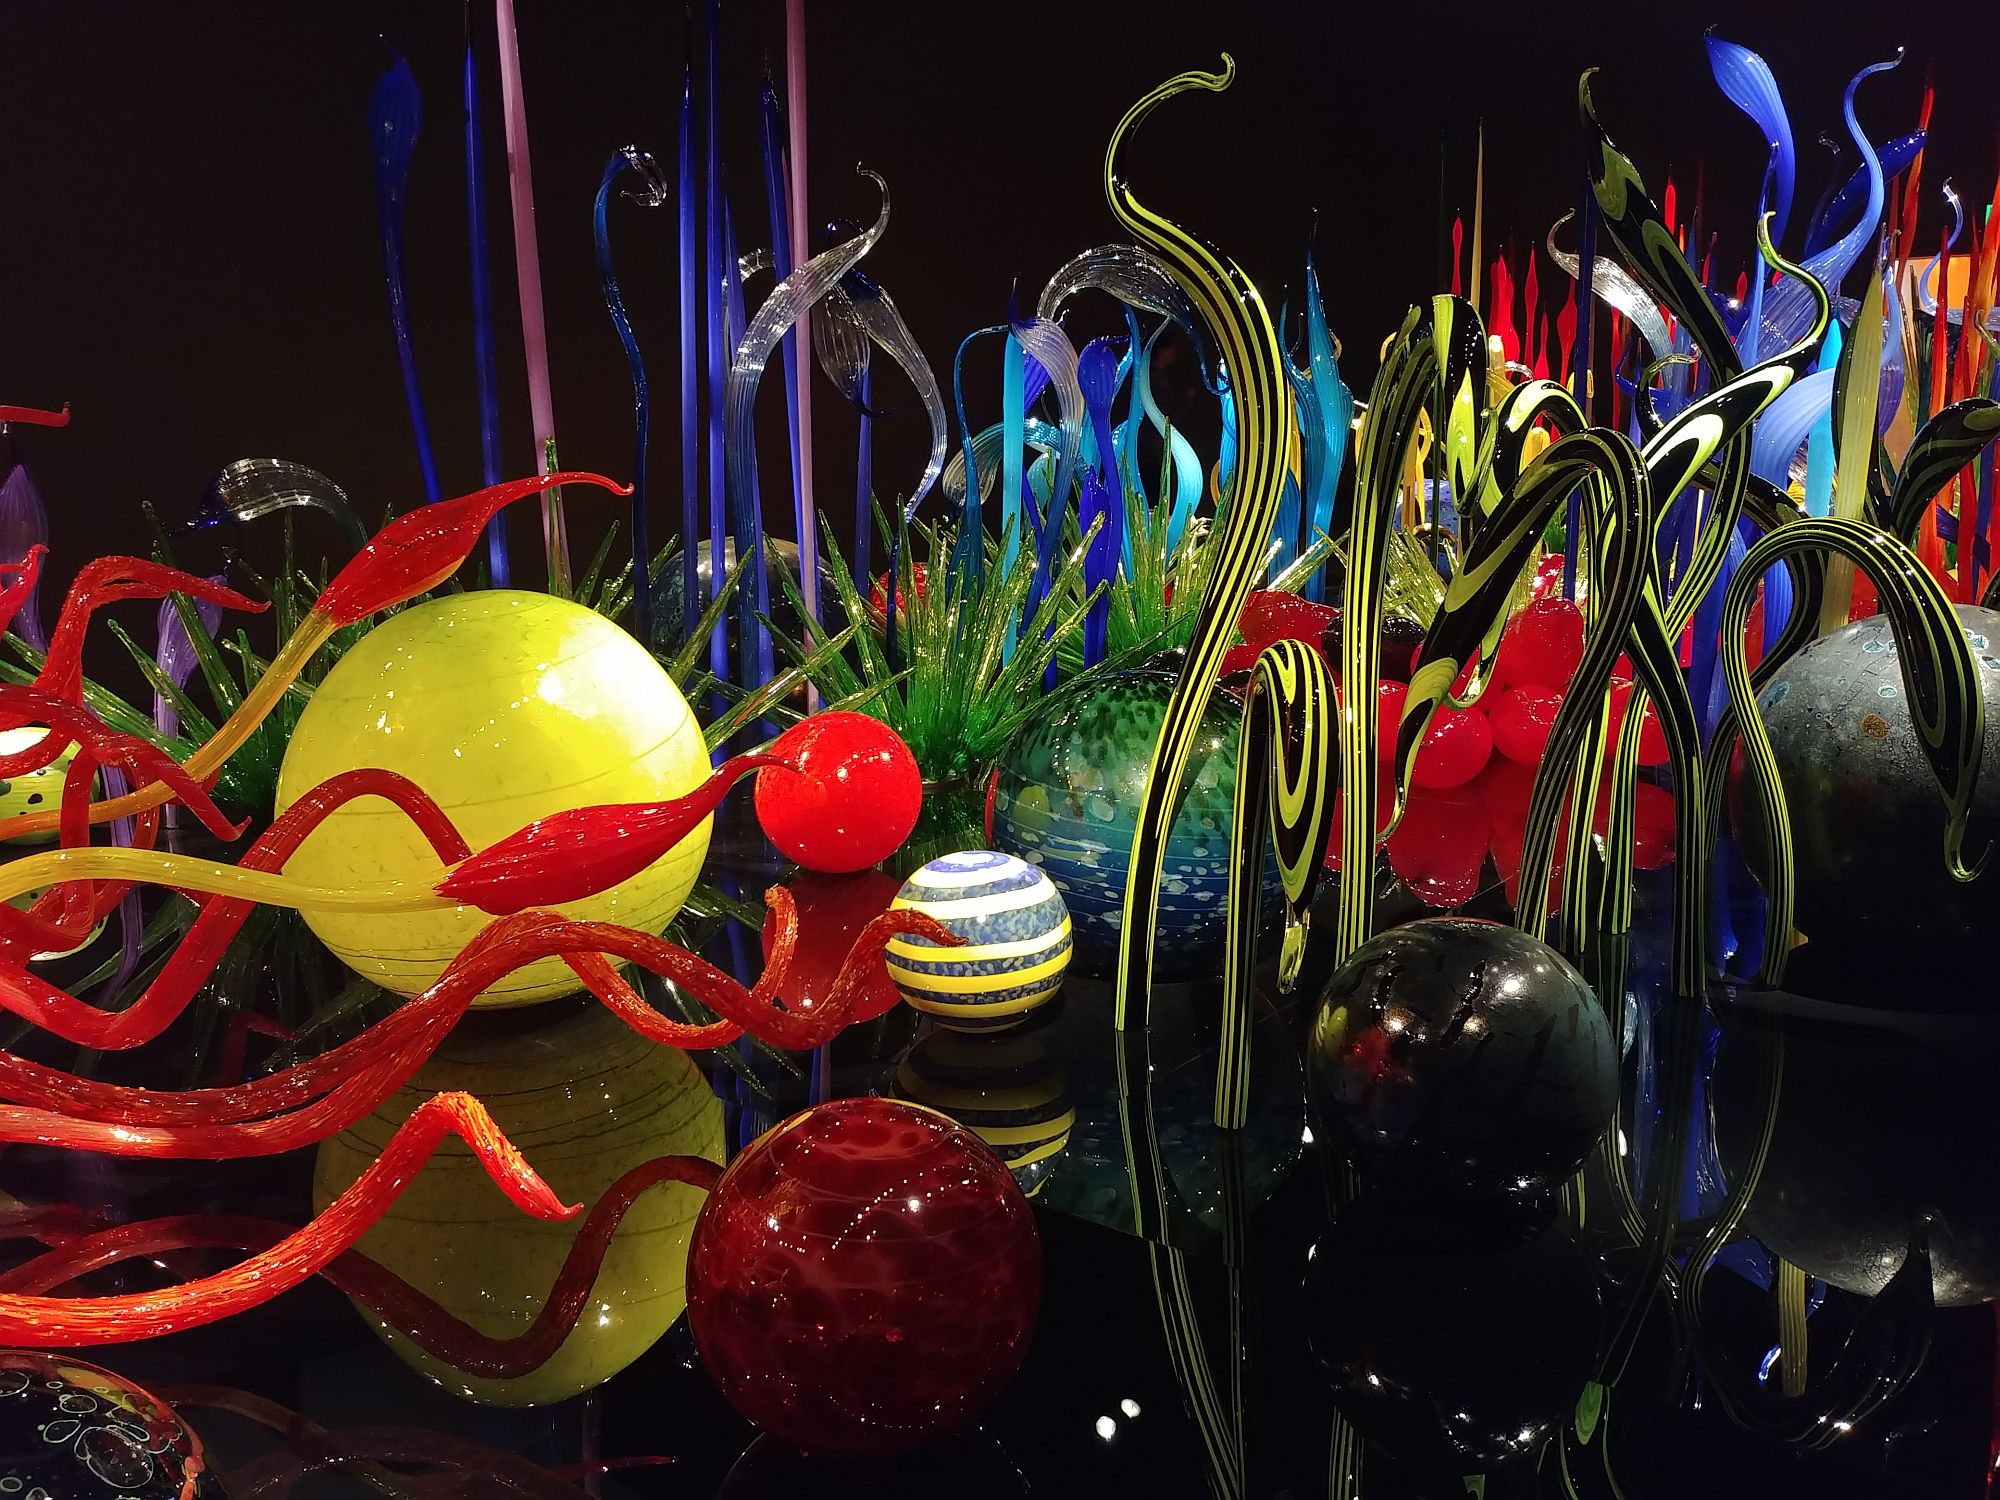 Chihuly Glass and Garden - 47